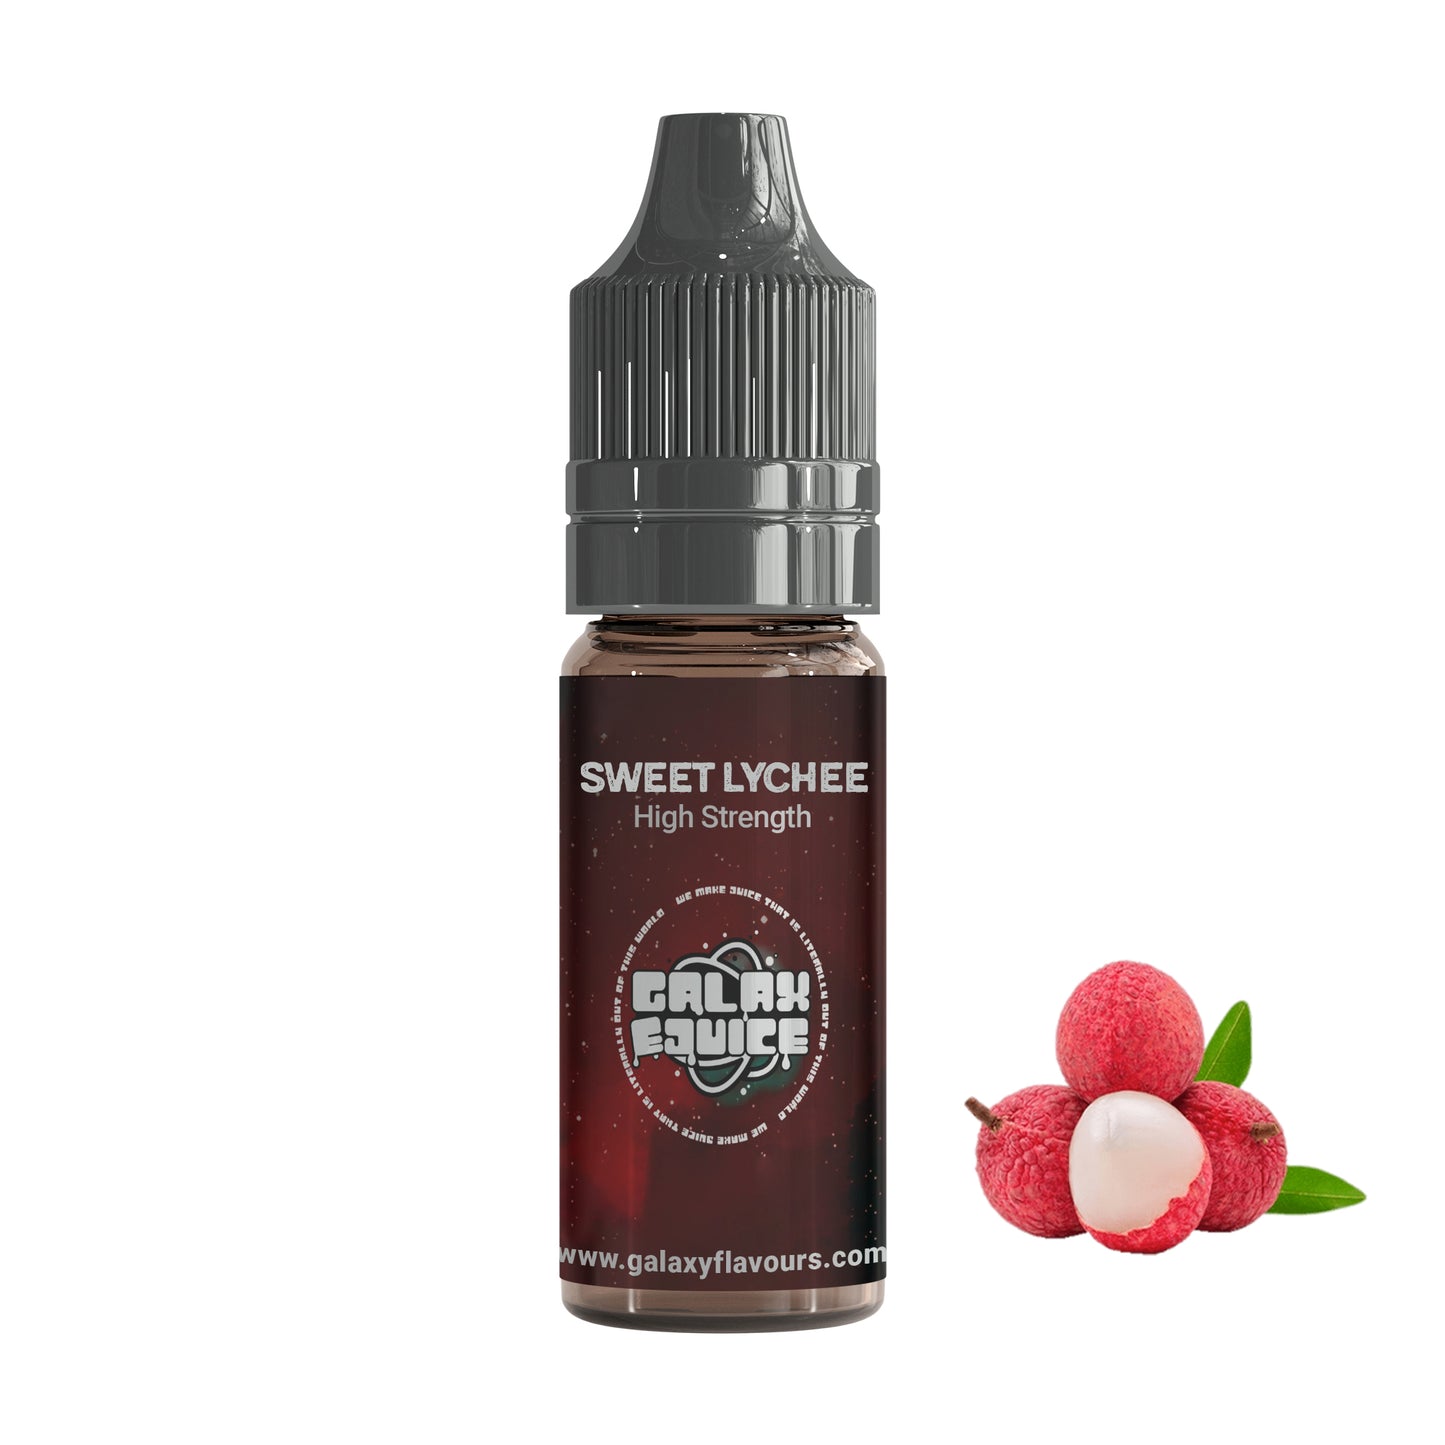 Sweet Lychee High Strength Professional Flavouring.